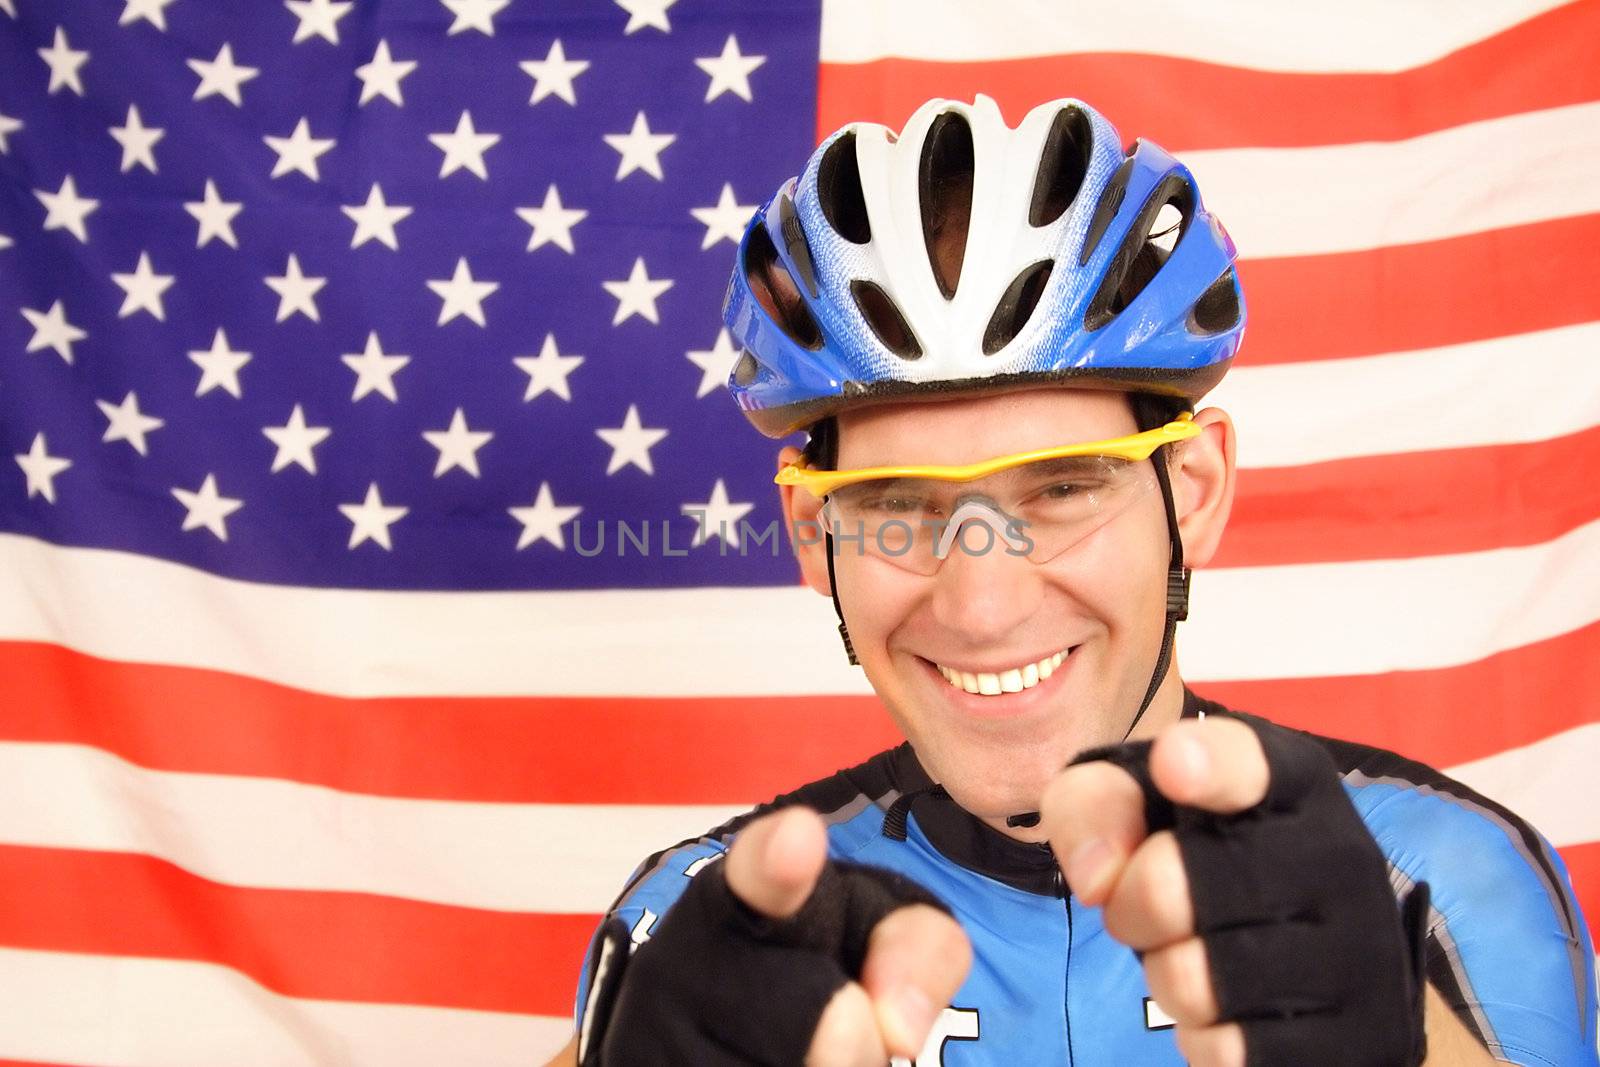 An US pro cyclist in optimistic mood in front of the flag of the United States of America.